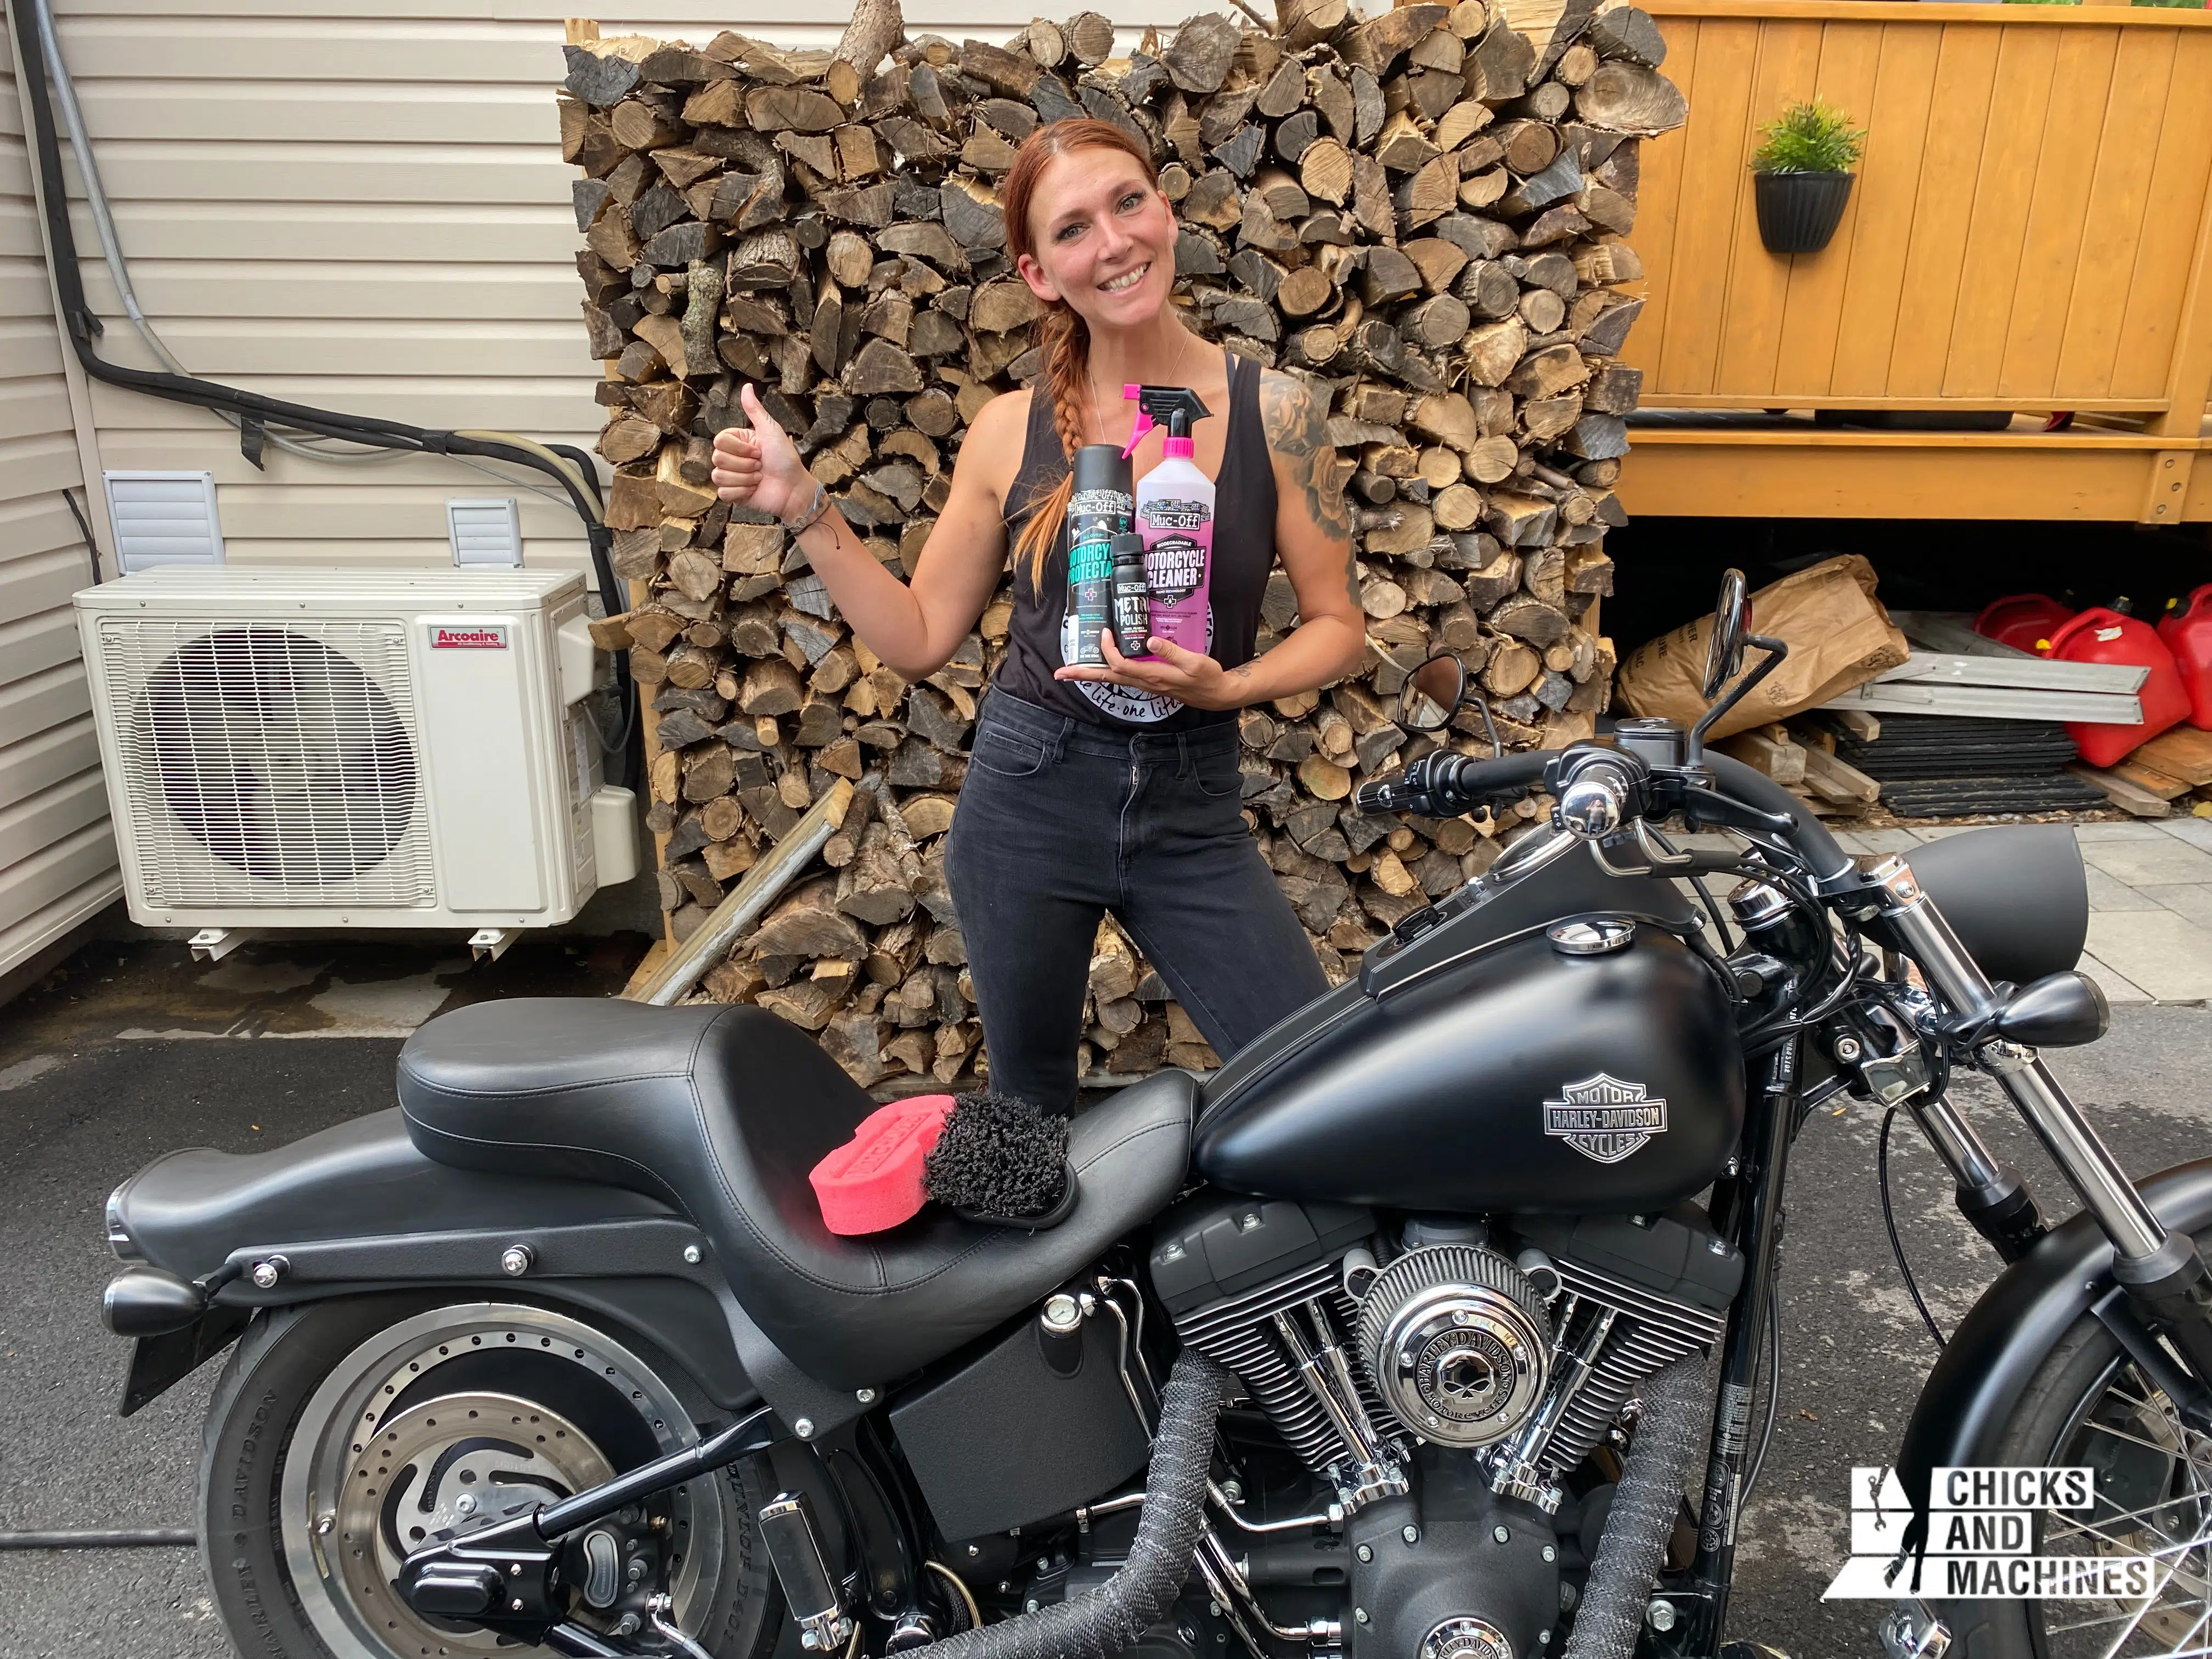 Caro is very happy with the result of the Muc-Off products on her beautiful Harley-Davidson!